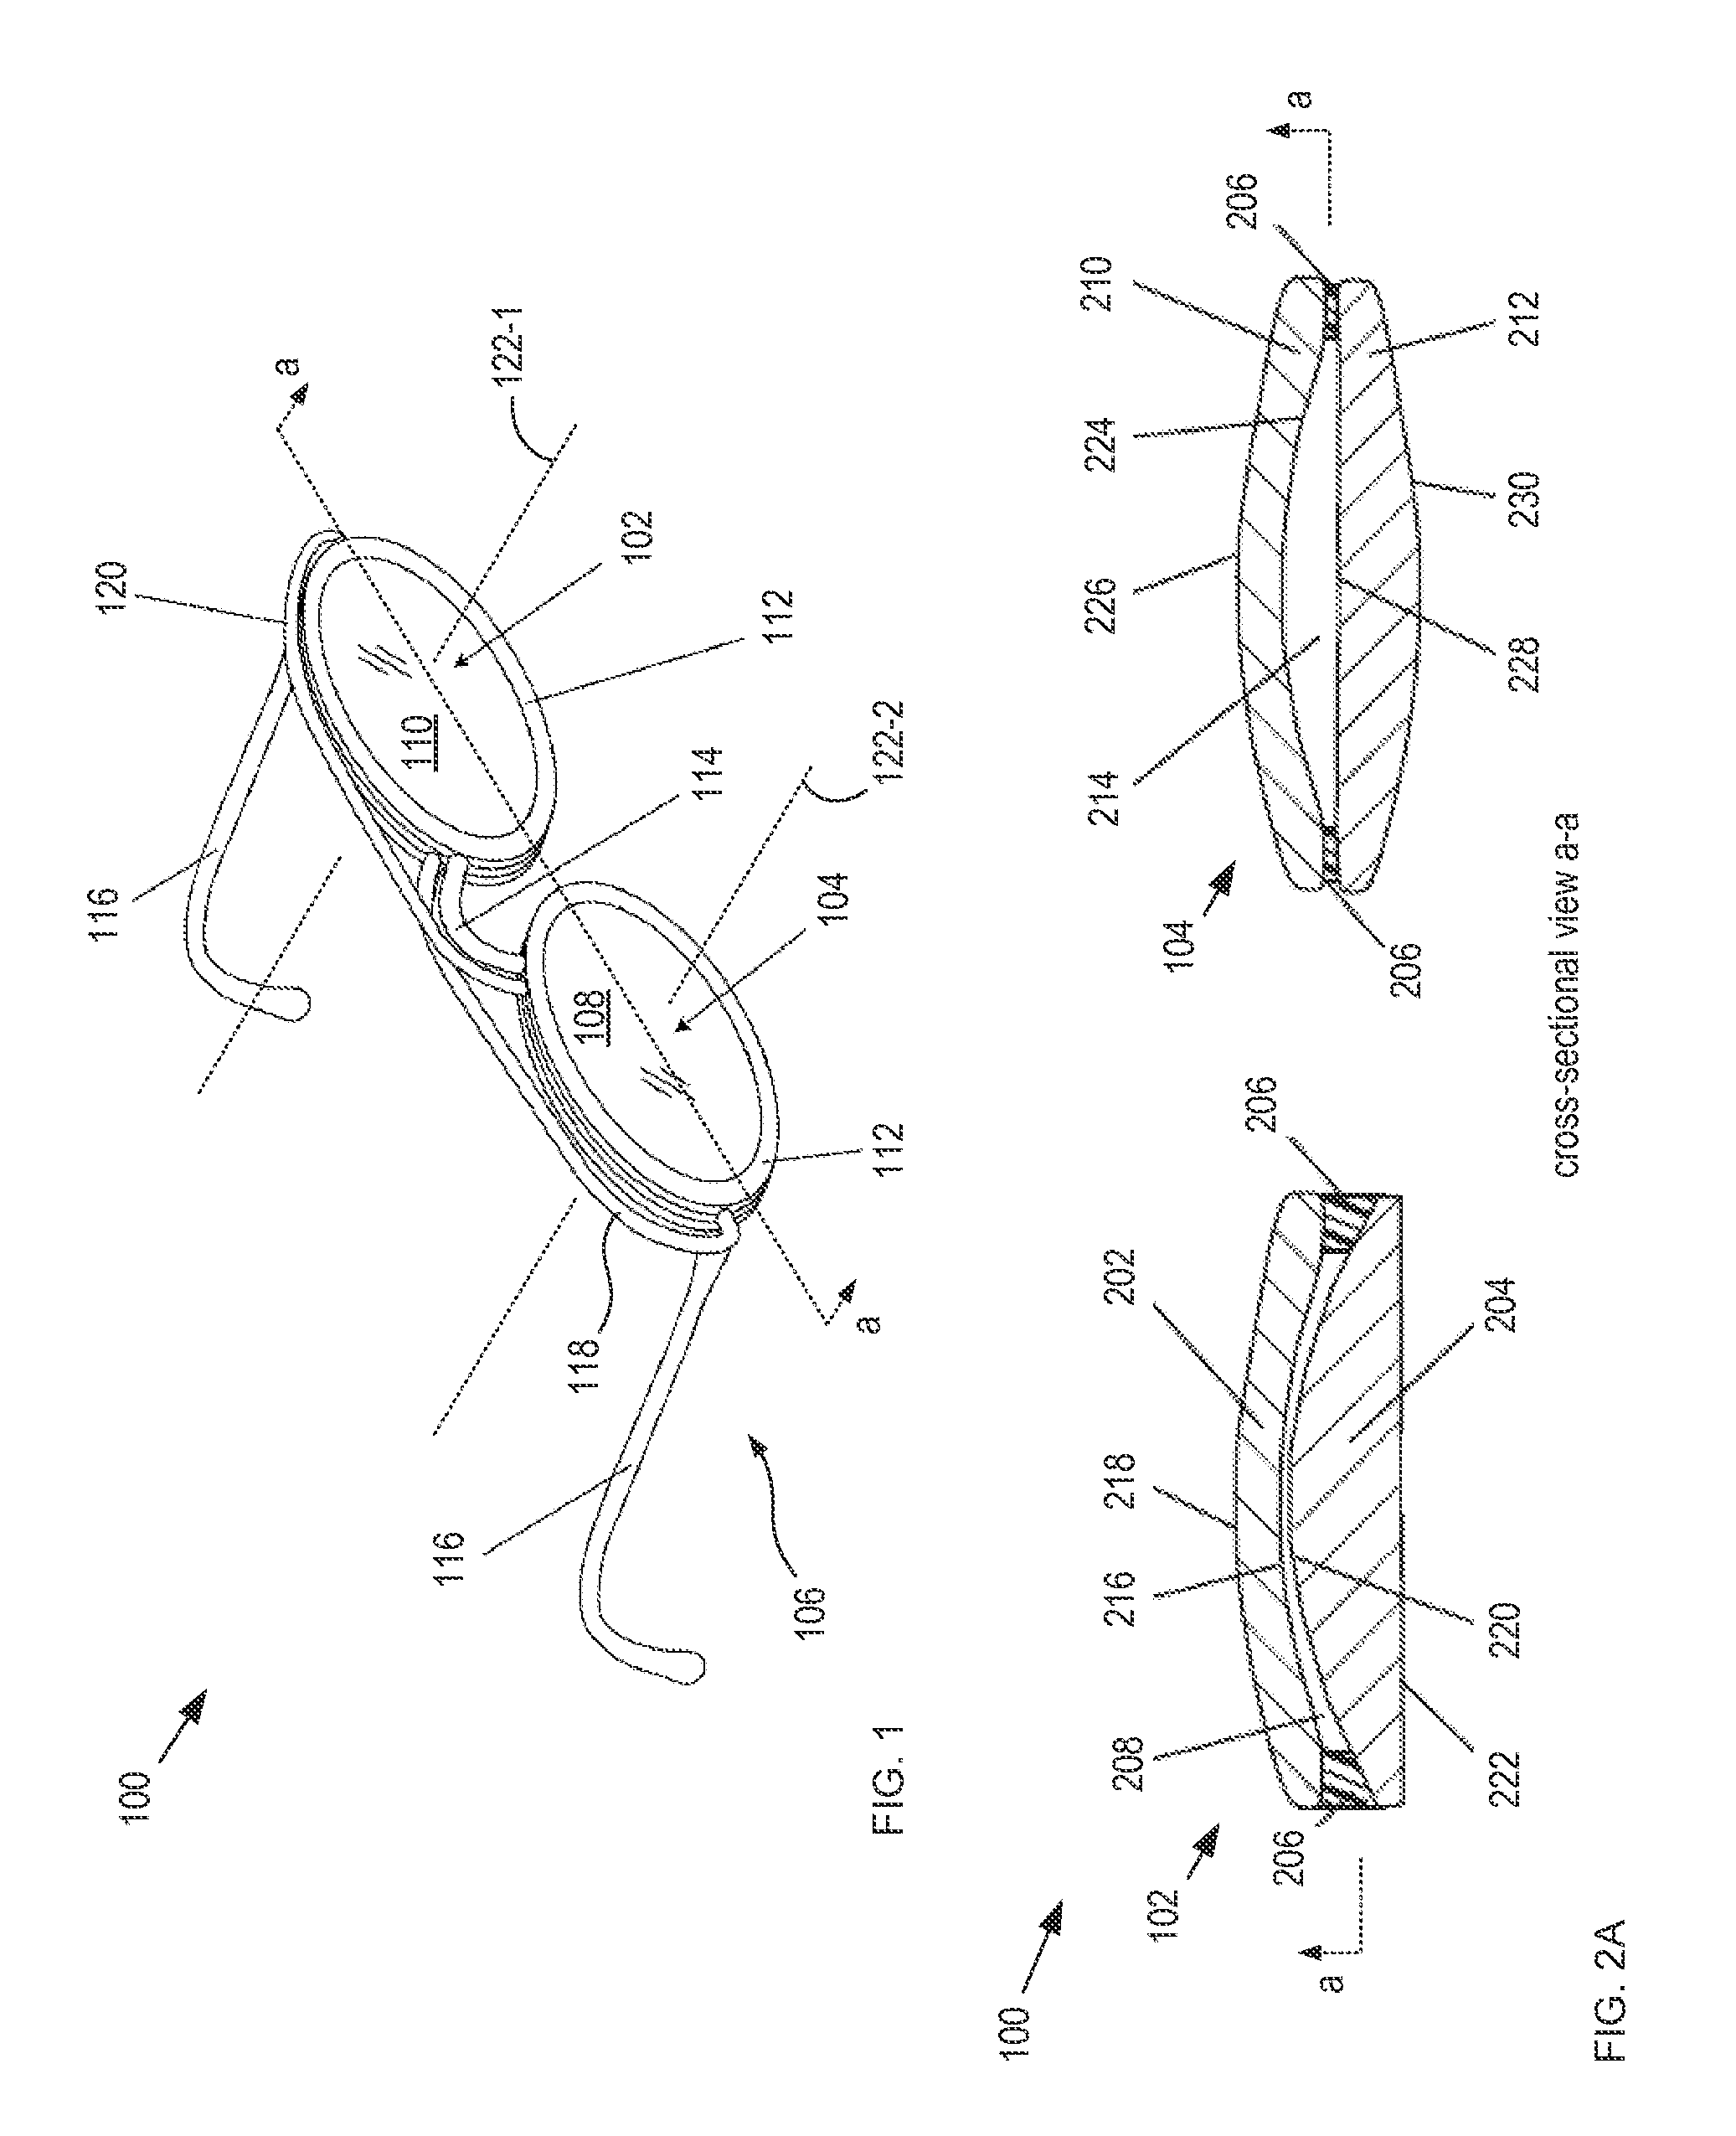 Apparatus and method for multi-focus lens system